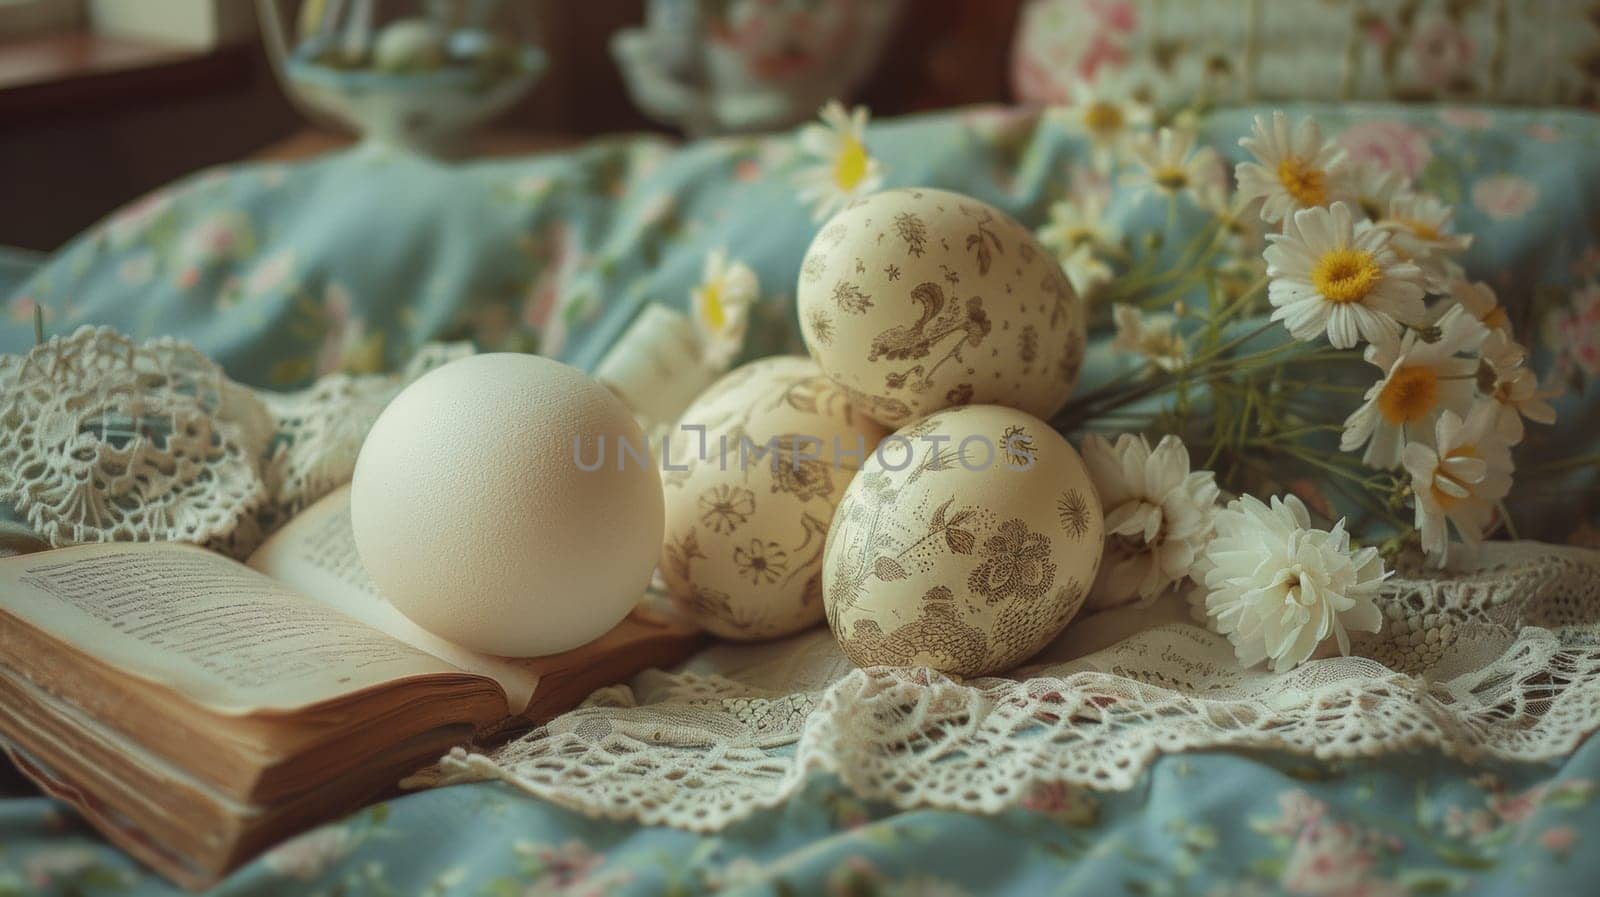 A book, eggs and flowers on a bed with lace